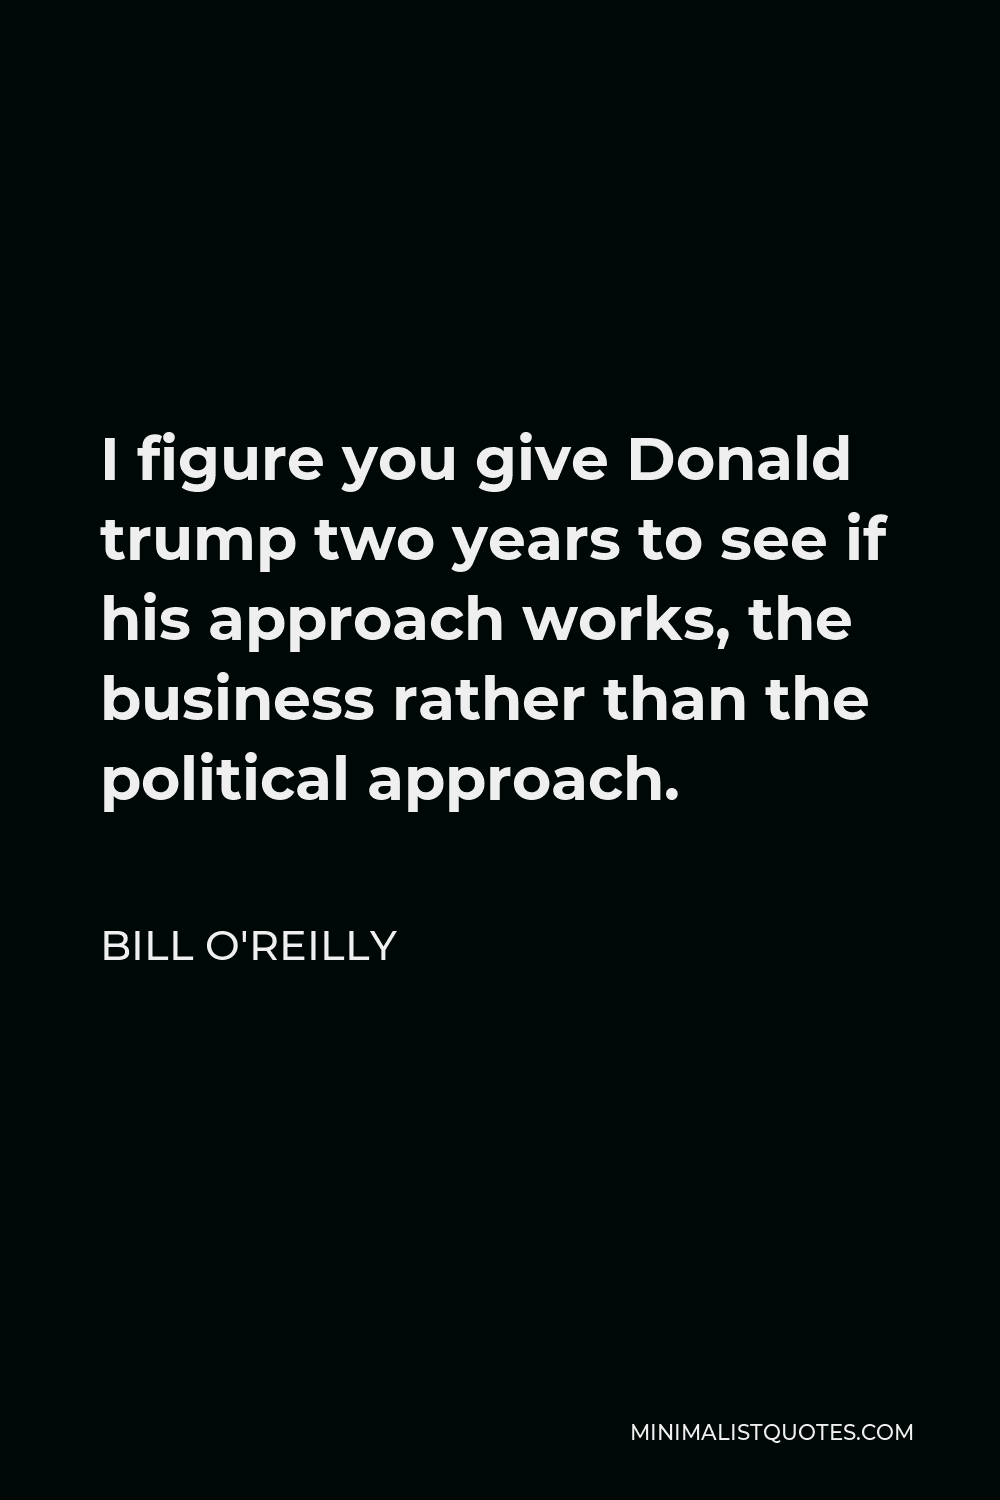 Bill O'Reilly Quote - I figure you give Donald trump two years to see if his approach works, the business rather than the political approach.